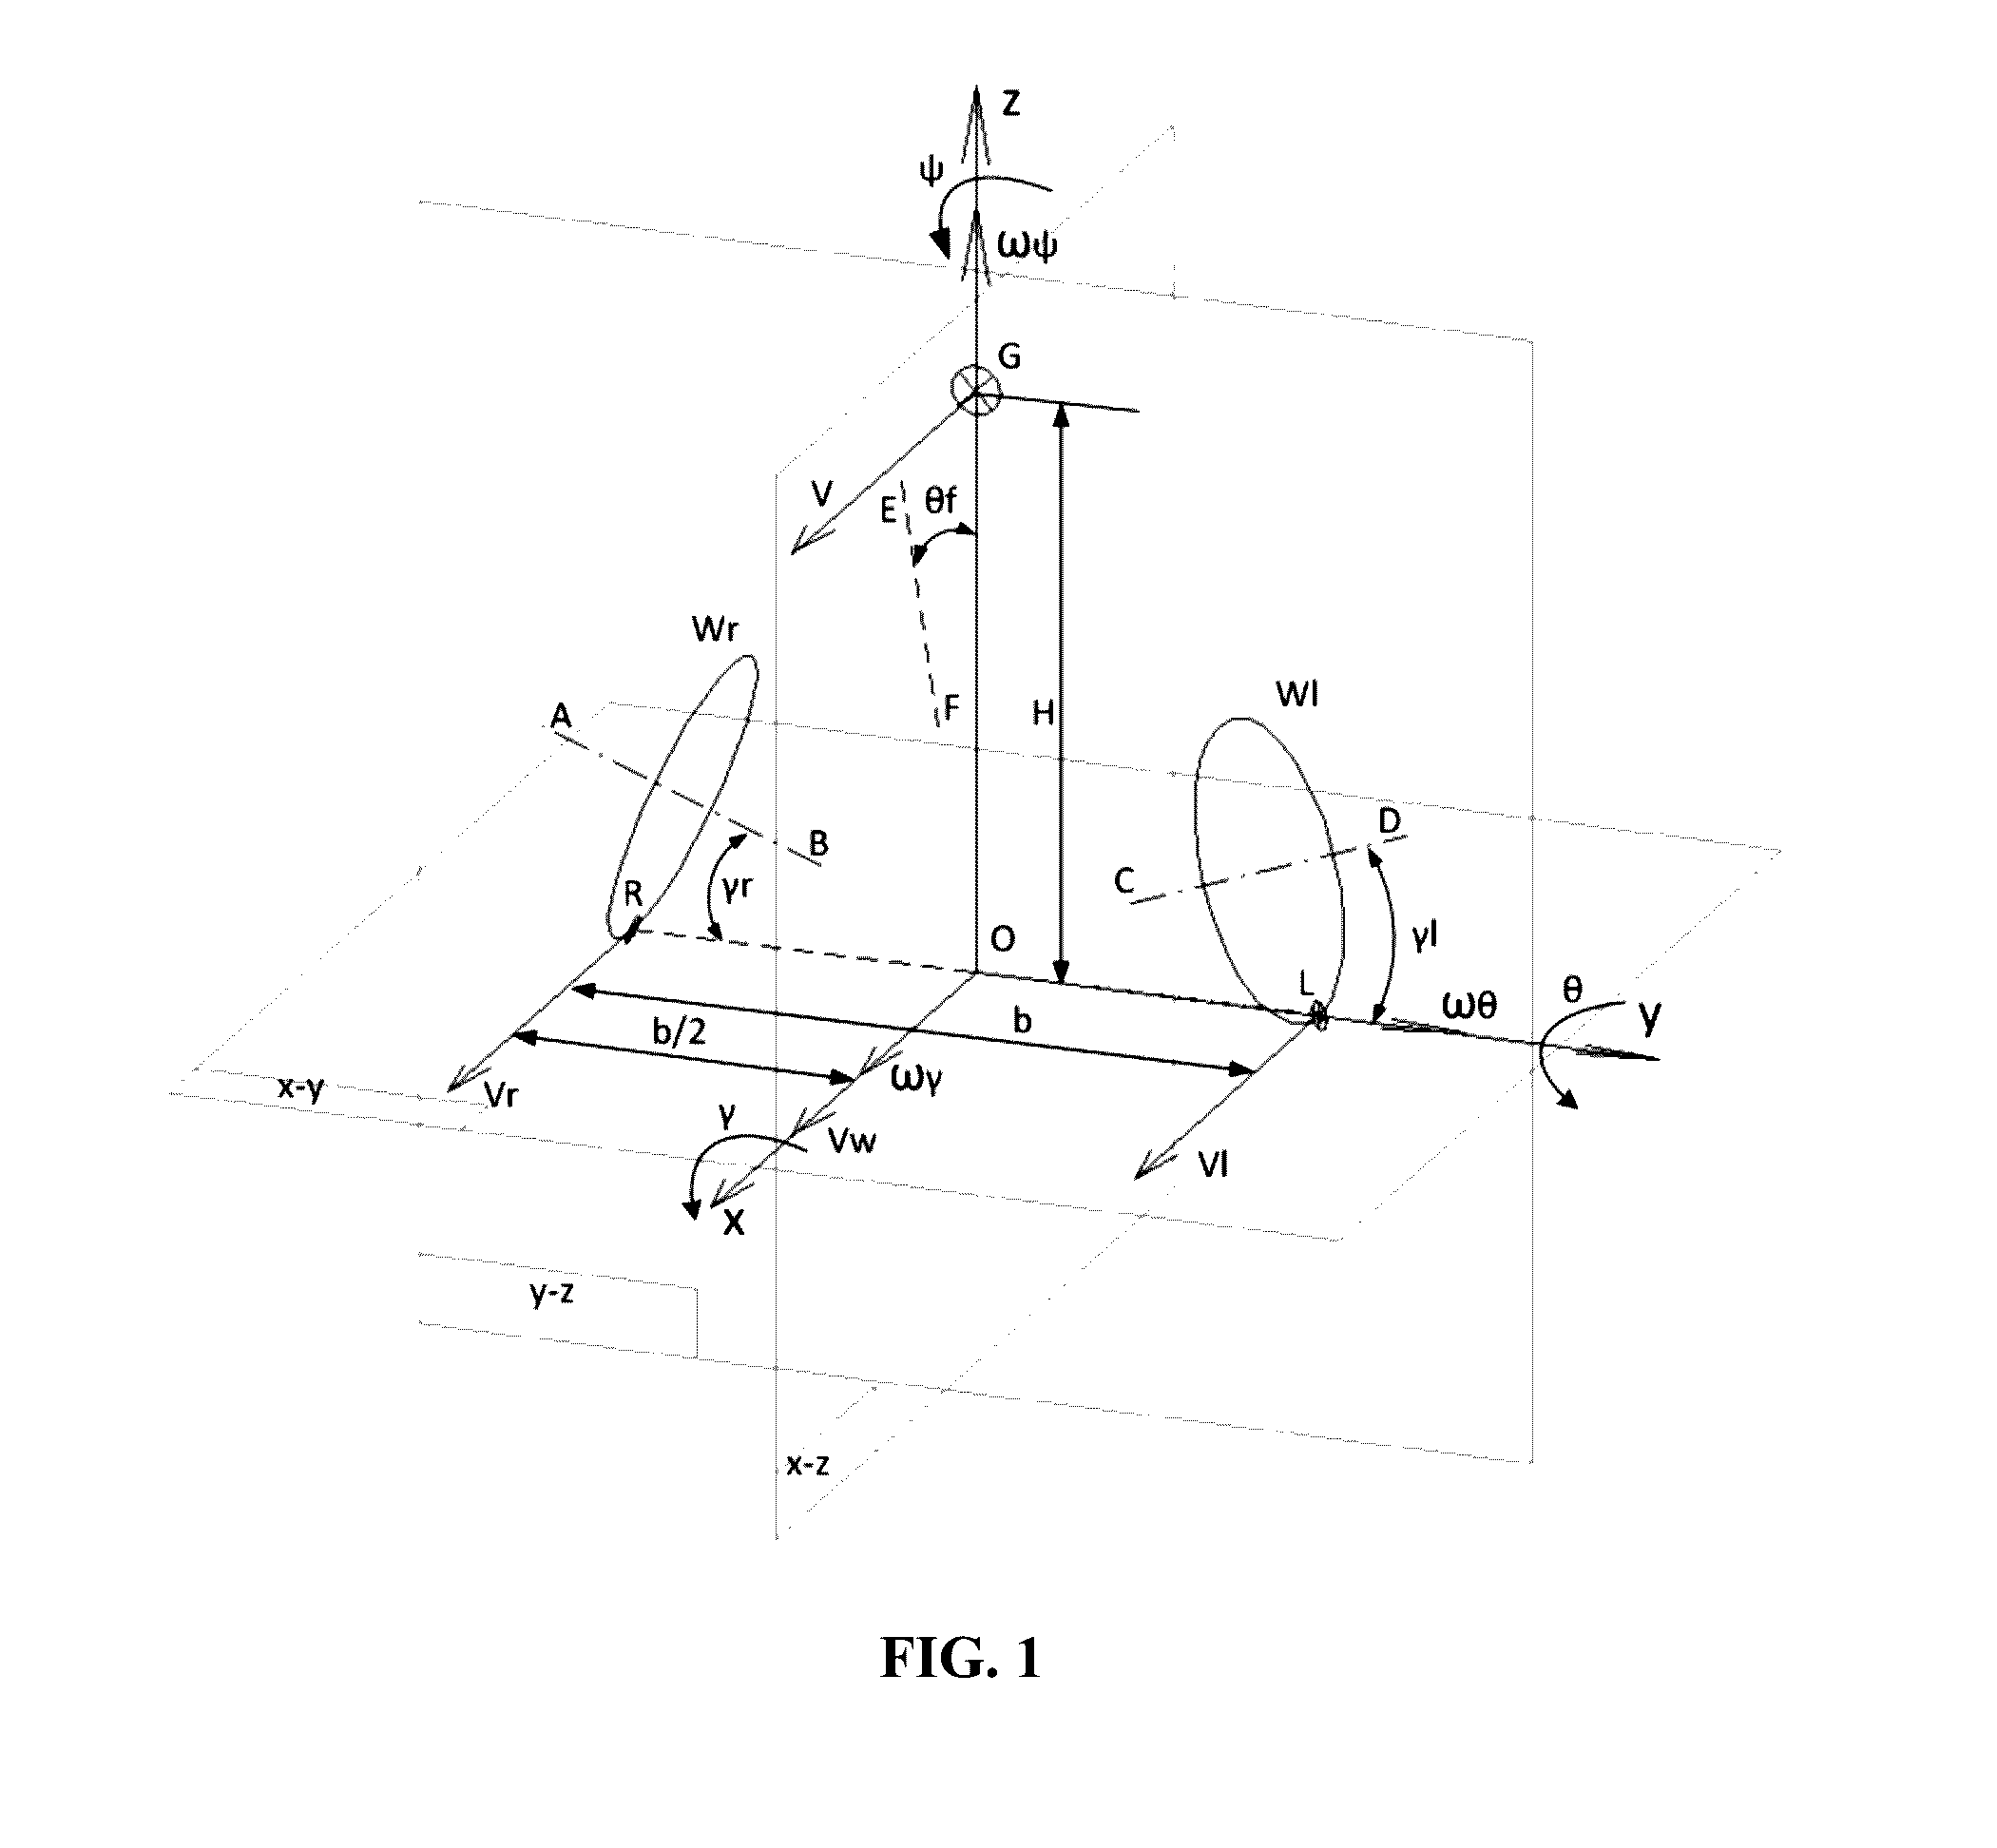 Two-wheeled gyroscope-stabilized vehicle and methods for controlling thereof